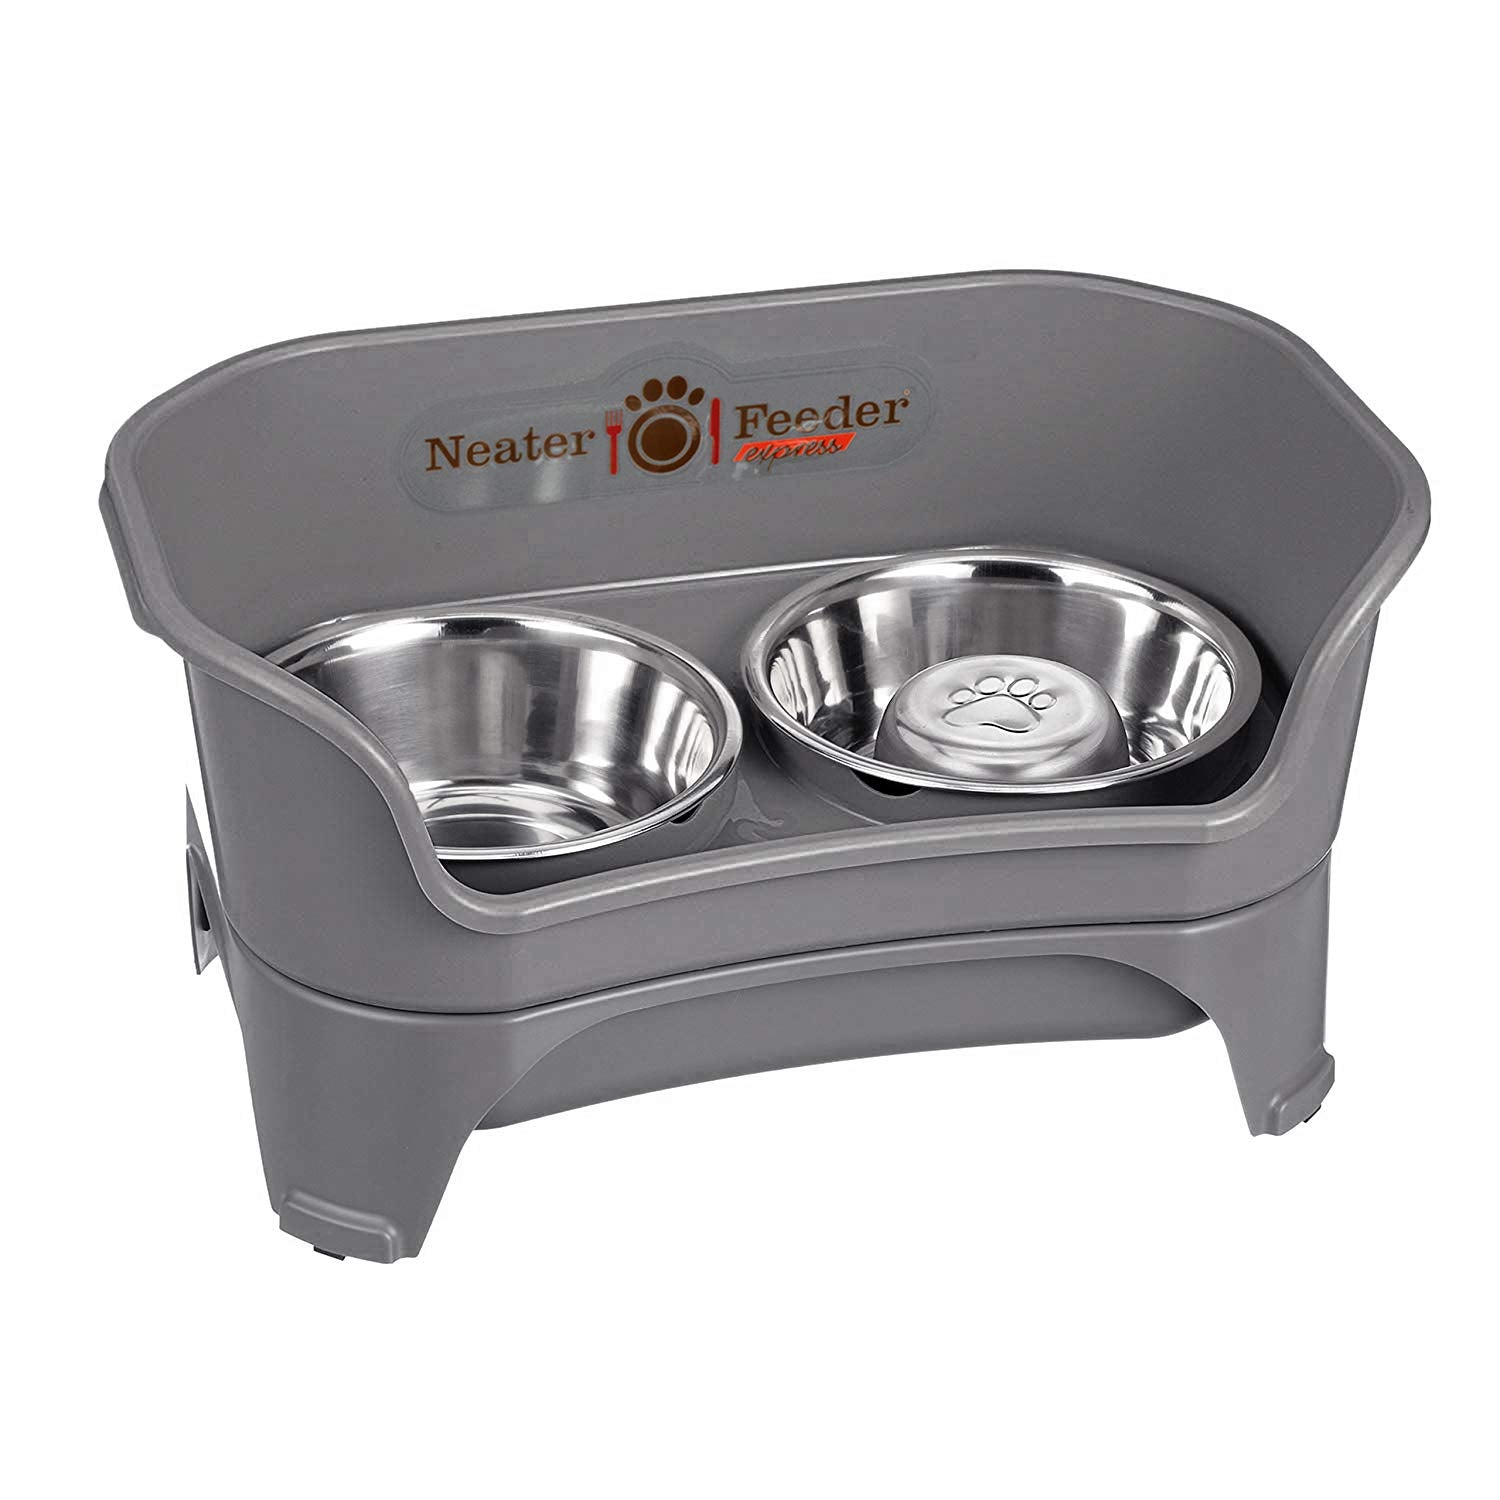 Neater Pets Slow Feeder | 6 Cup Large Gunmetal Grey 7.5 height